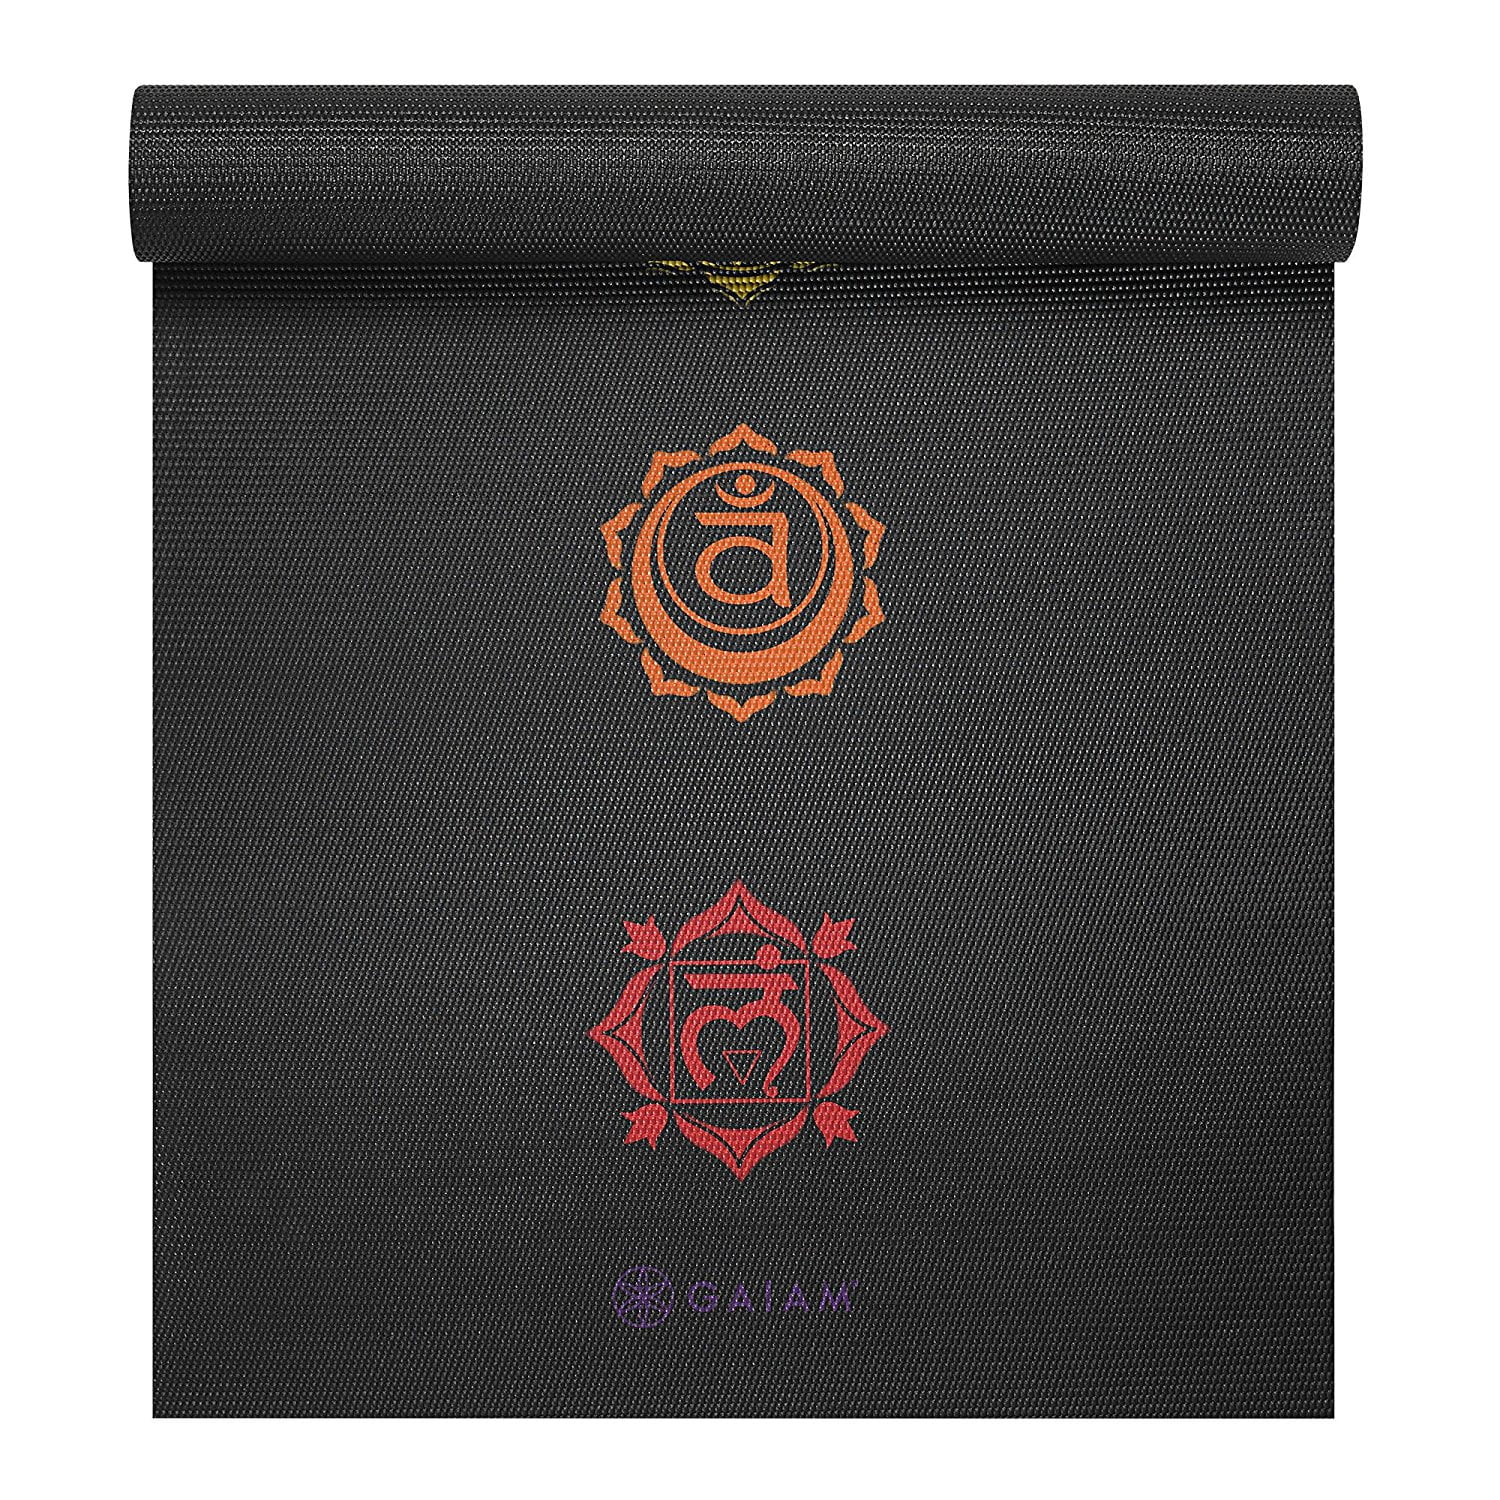  Gaiam Yoga Mat Premium Print Reversible Extra Thick Non Slip  Exercise & Fitness Mat for All Types of Yoga, Pilates & Floor Workouts, Be  Free, 6mm : Sports & Outdoors